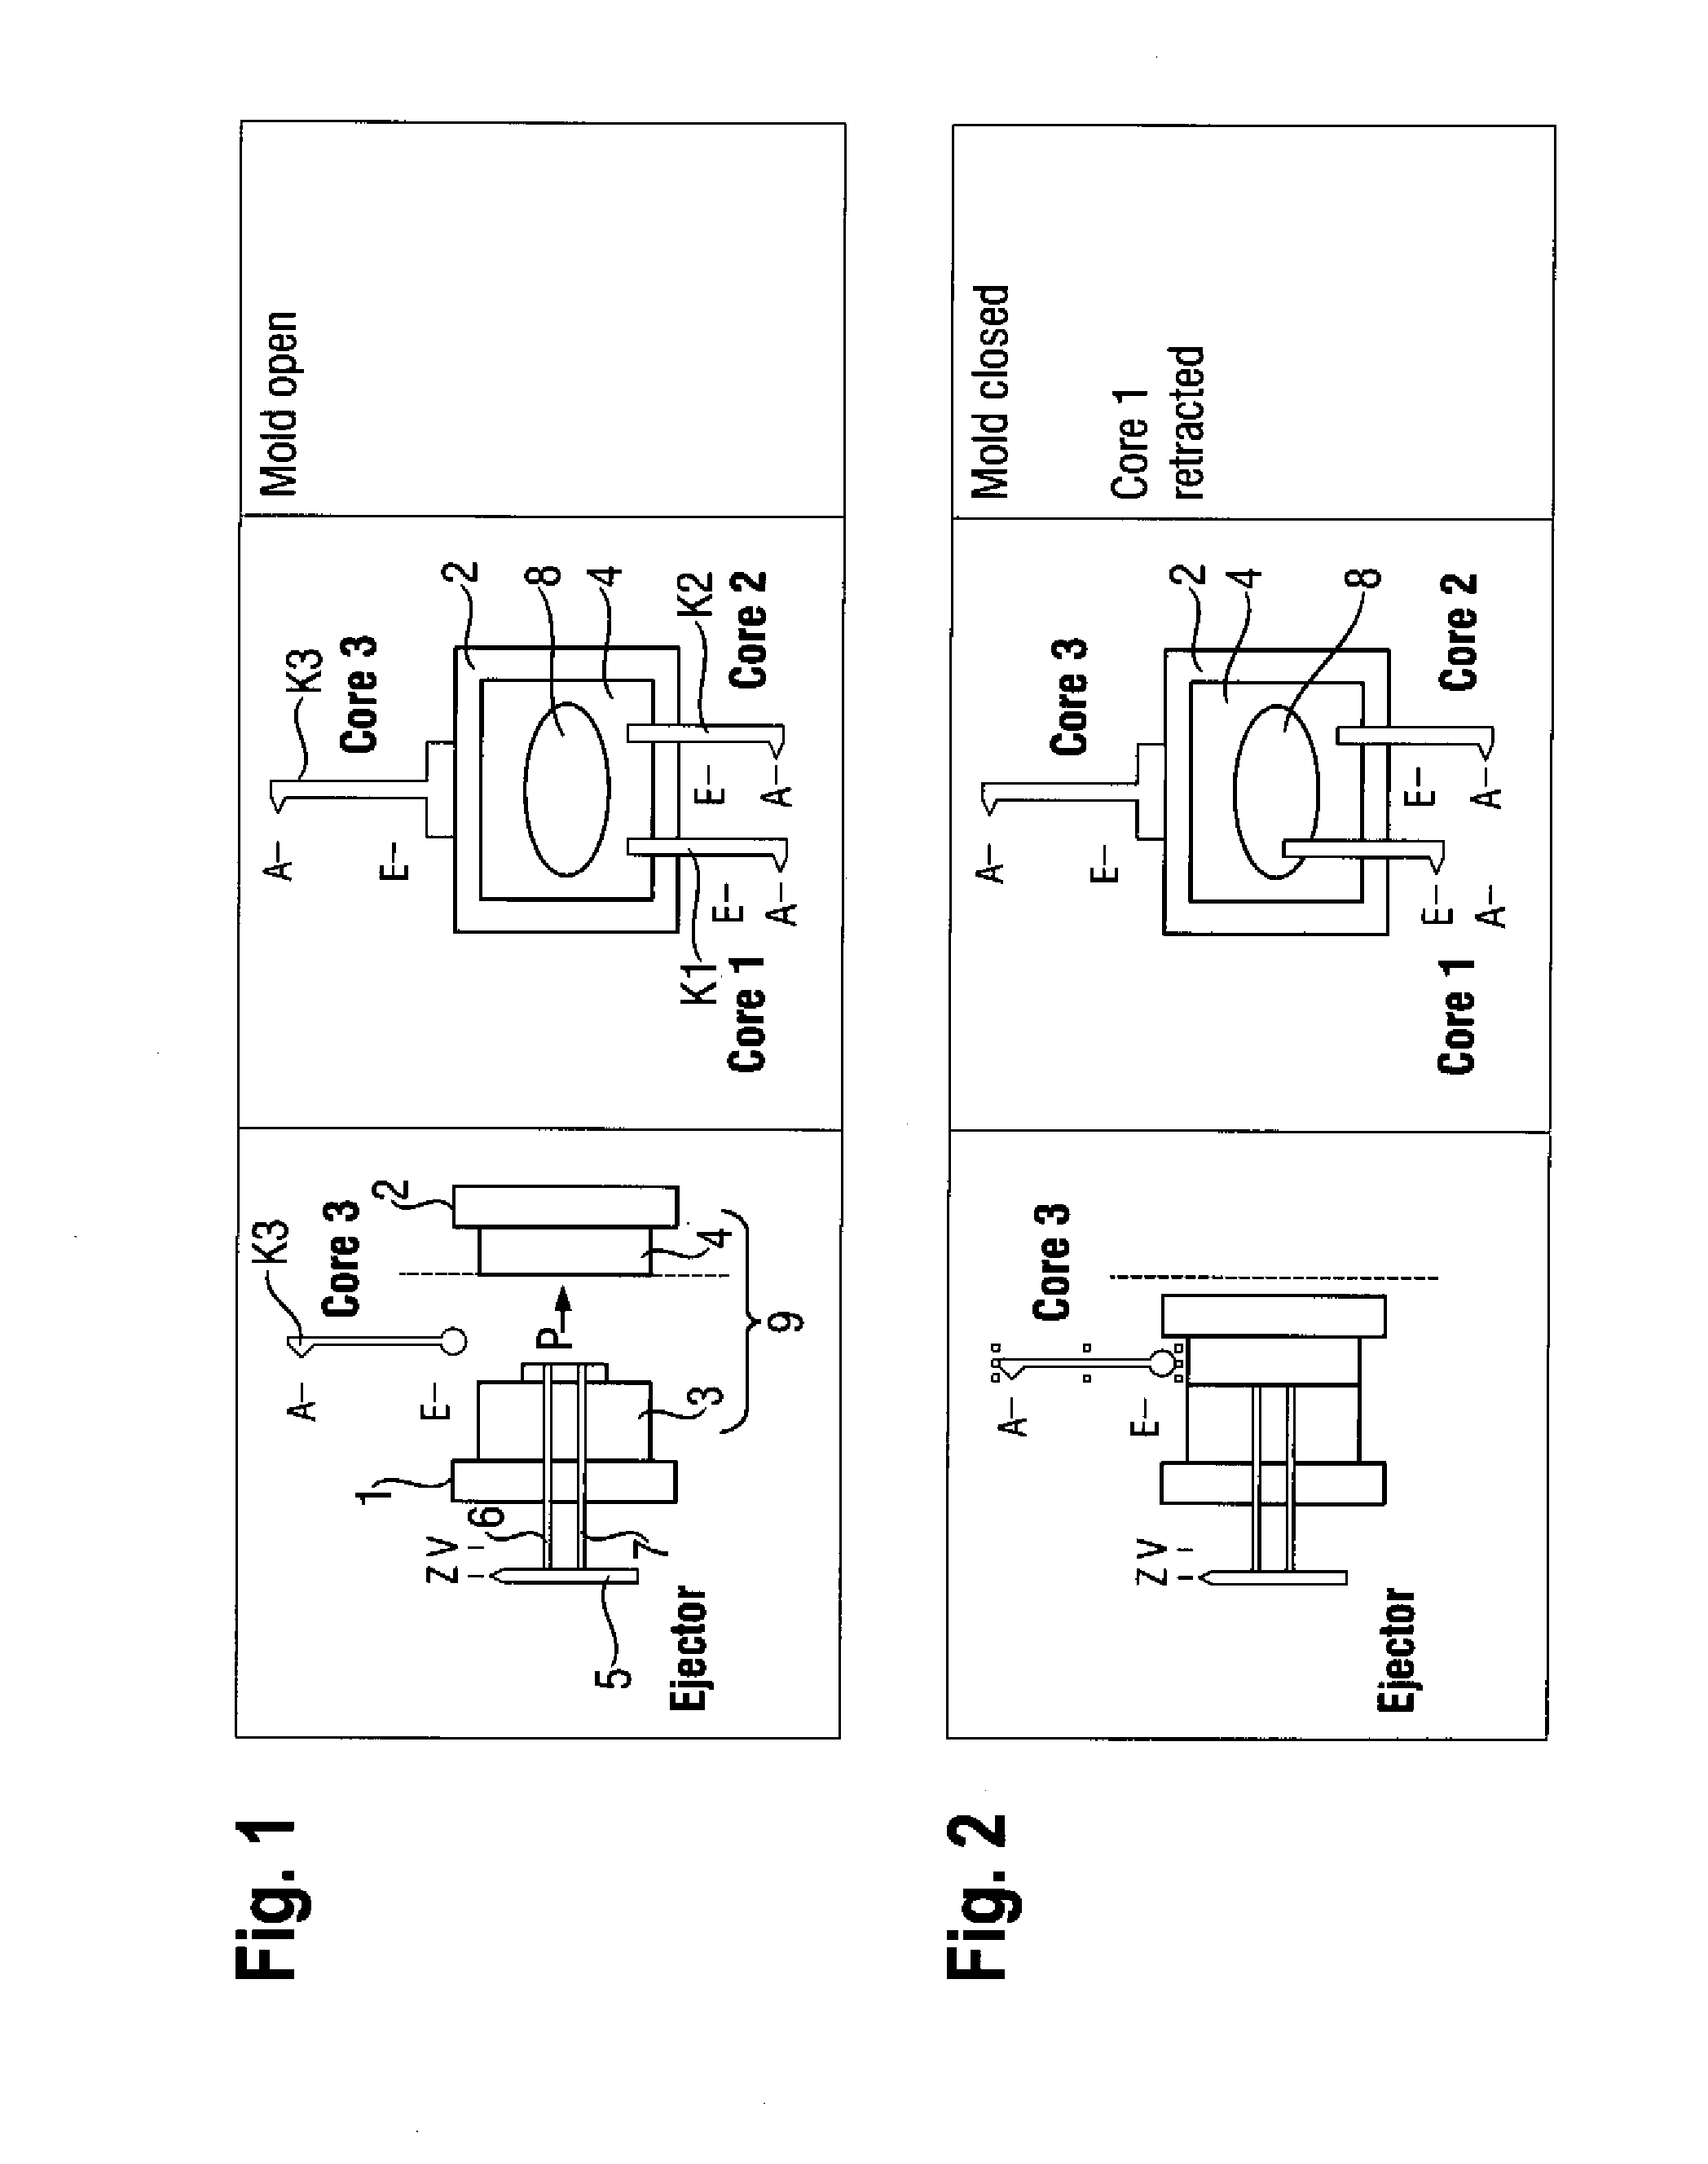 Method for sequential programming of an injection molding cycle of an injection molding machine